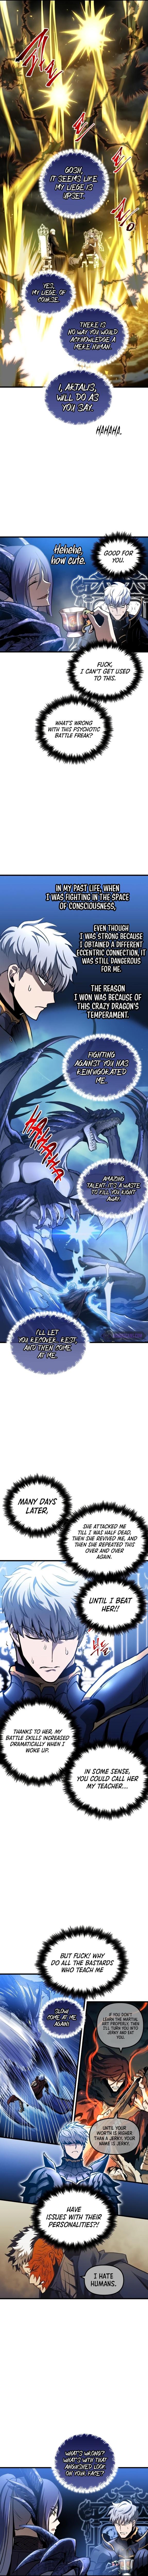 Reincarnation of the Suicidal Battle God - Chapter 73 Page 4